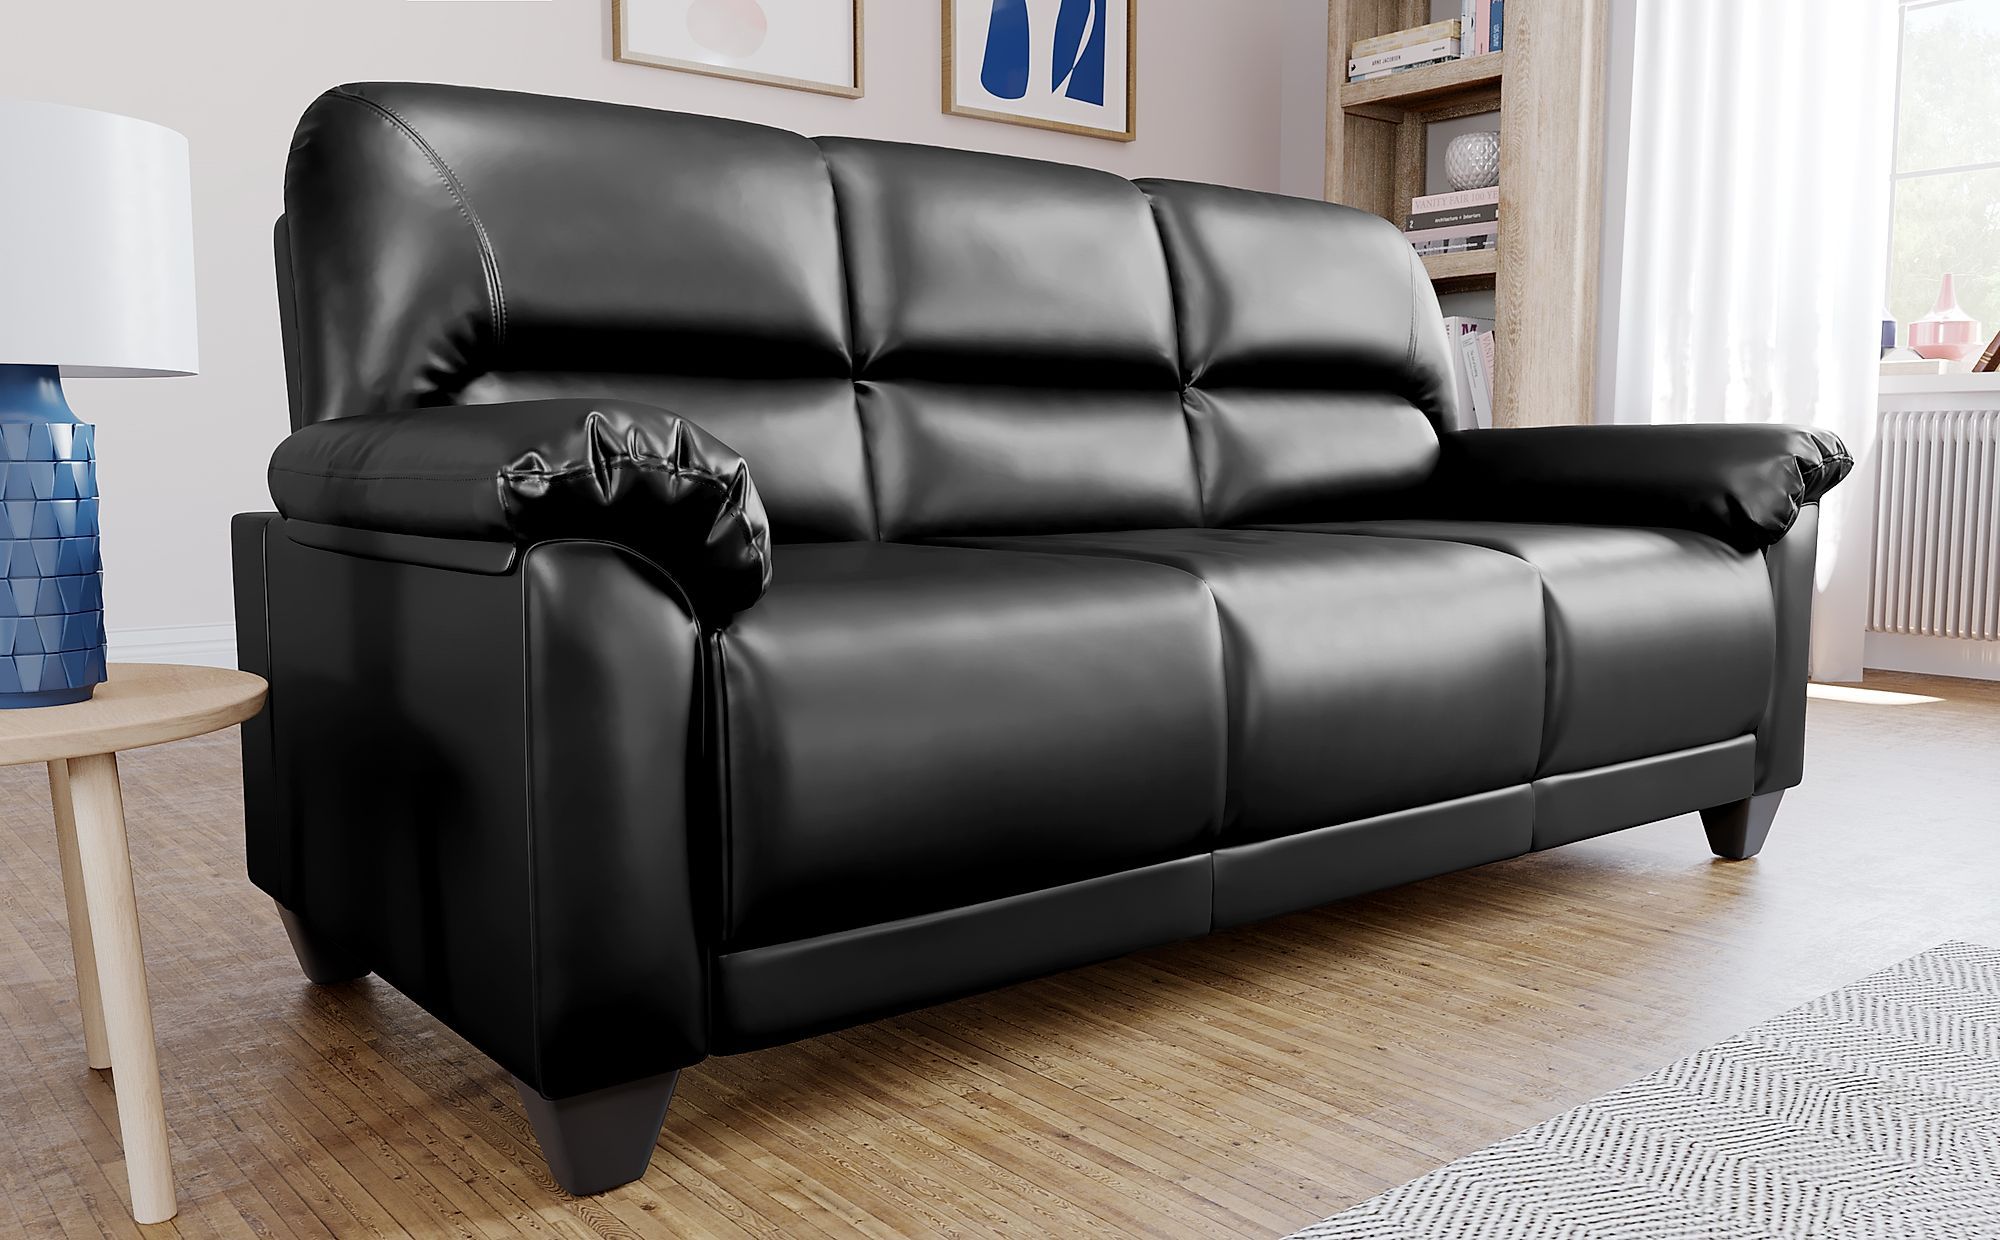 Kenton Small Black Leather 3 Seater Sofa | Furniture Choice Inside Sofas In Black (Gallery 14 of 20)